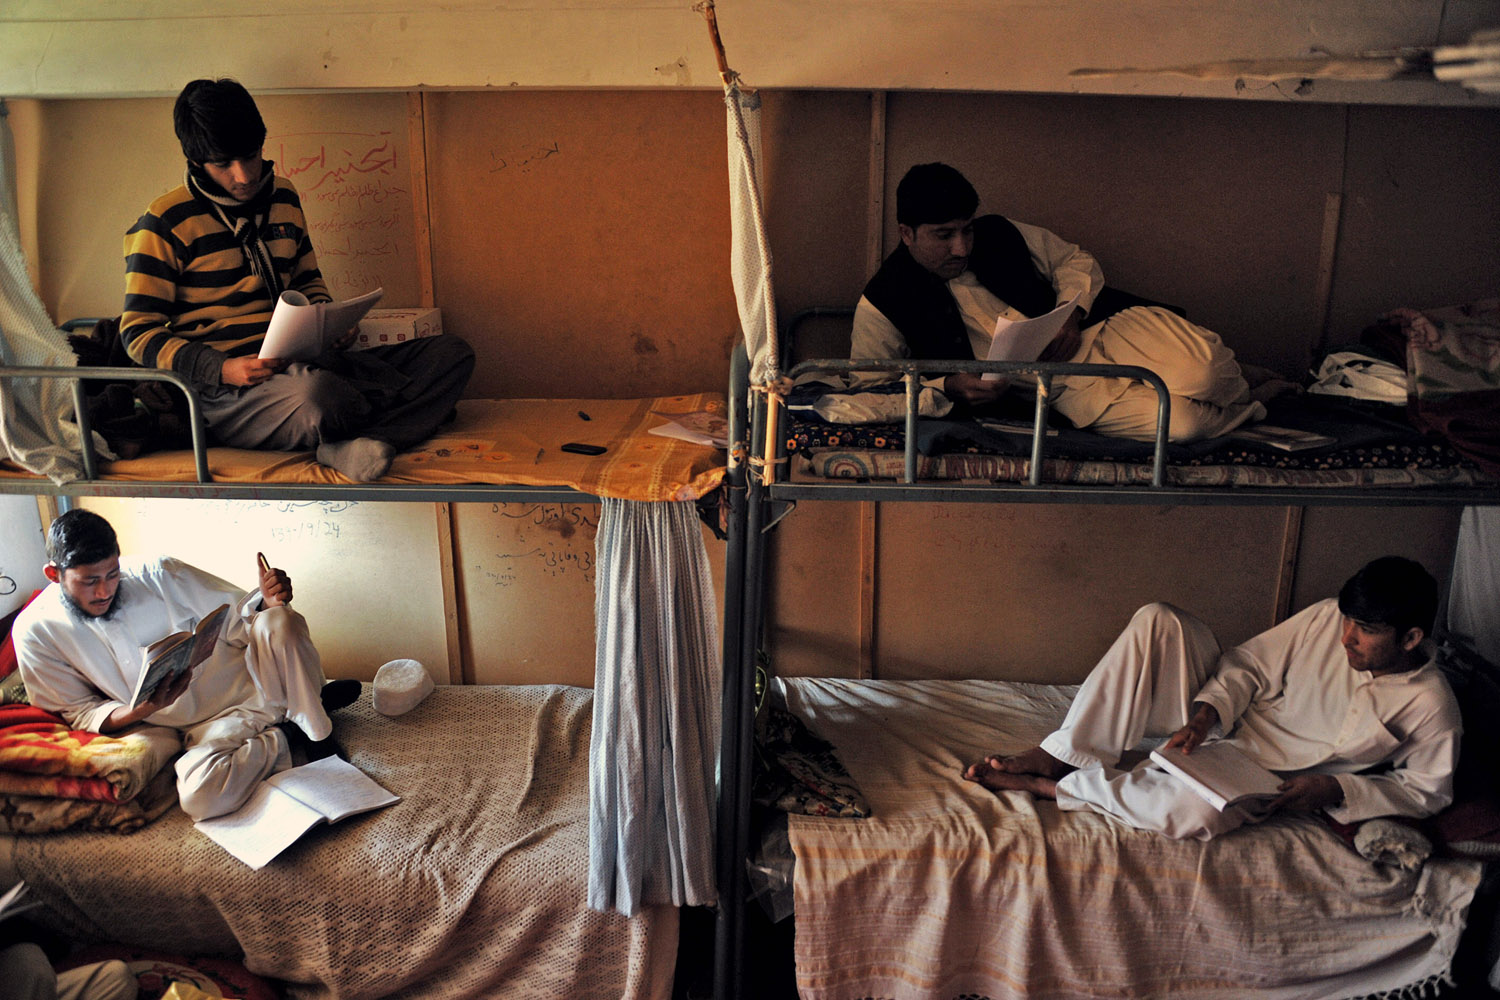 Feb. 23, 2013. Students study at a dormitory of Nangarhar university on the outskirts of Jalalabad, Afghanistan.